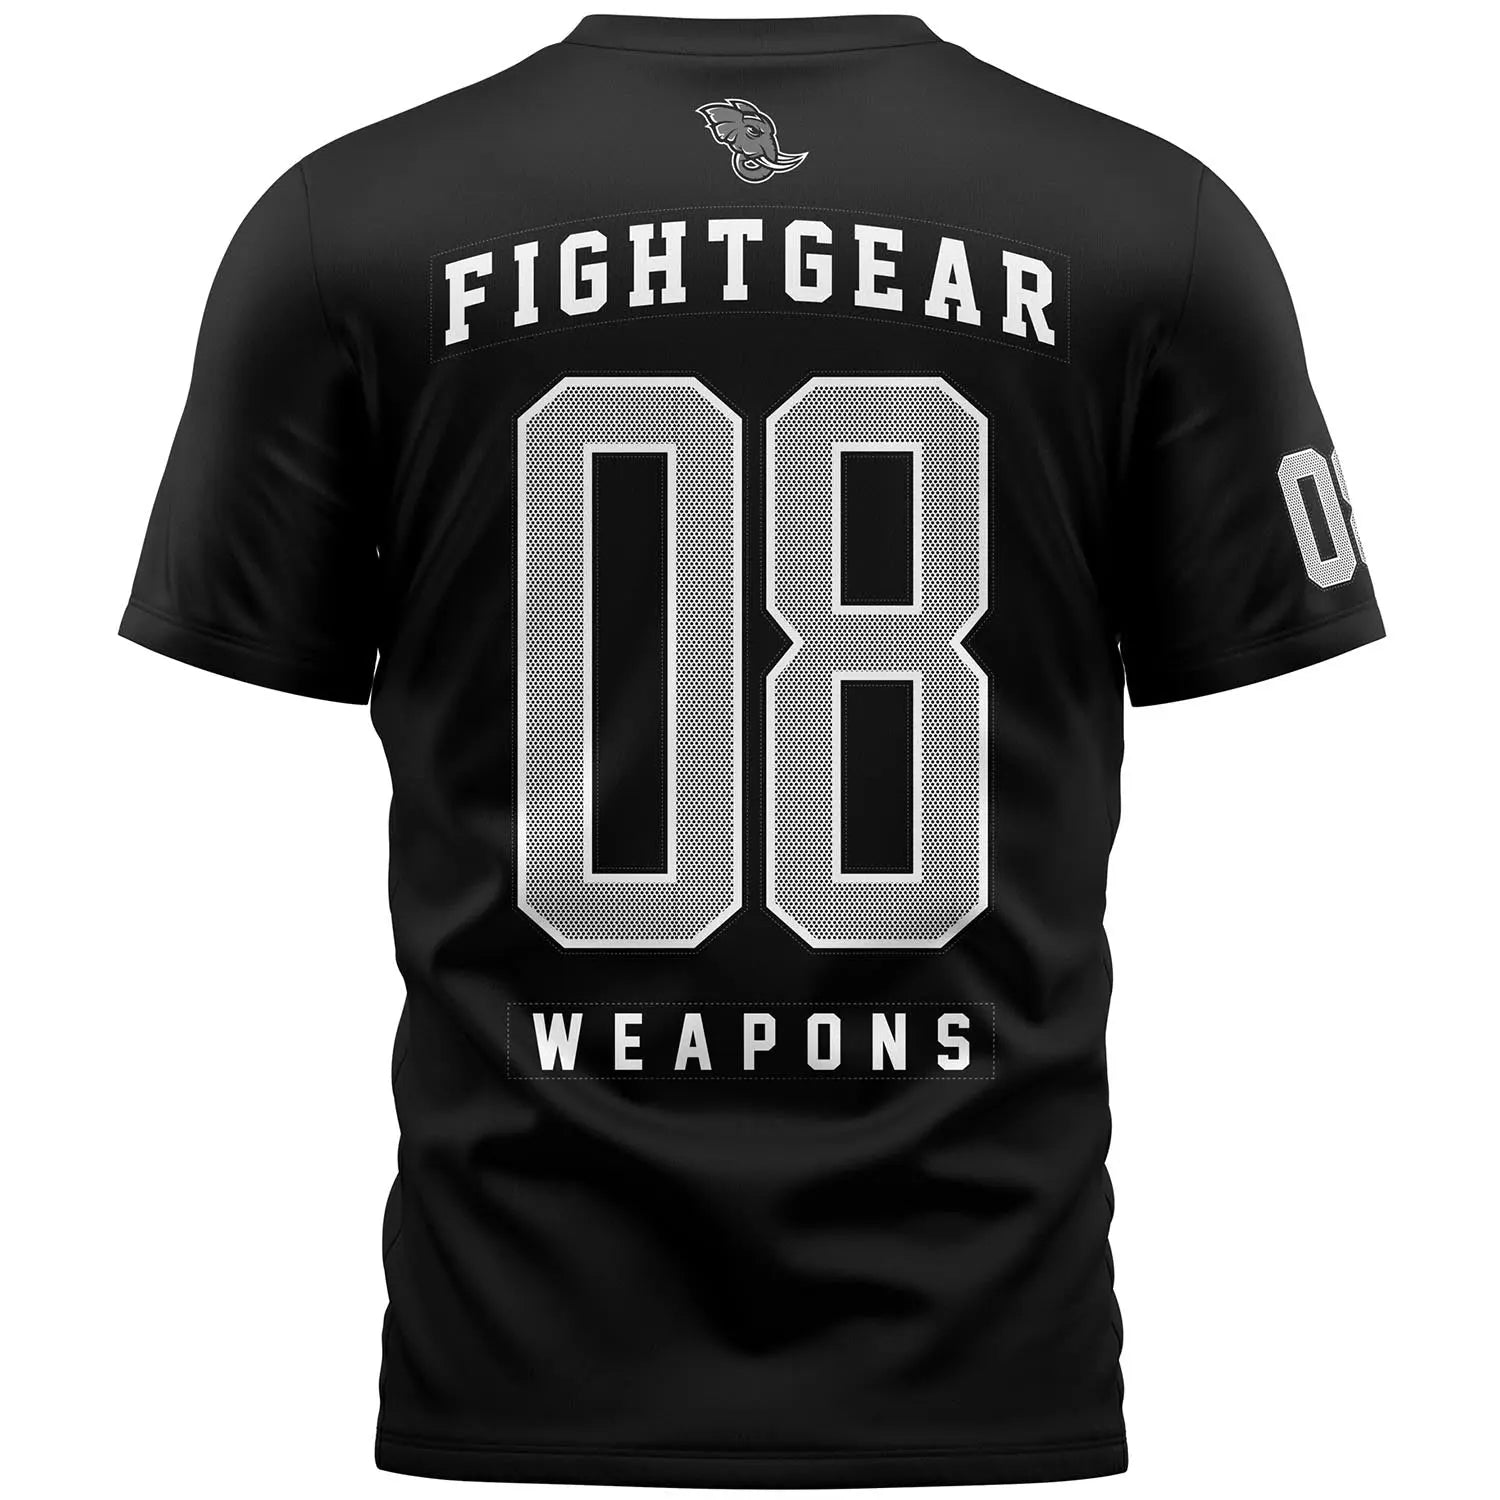 8 WEAPONS T-Shirt - Team 08 2.0 - Fight Co